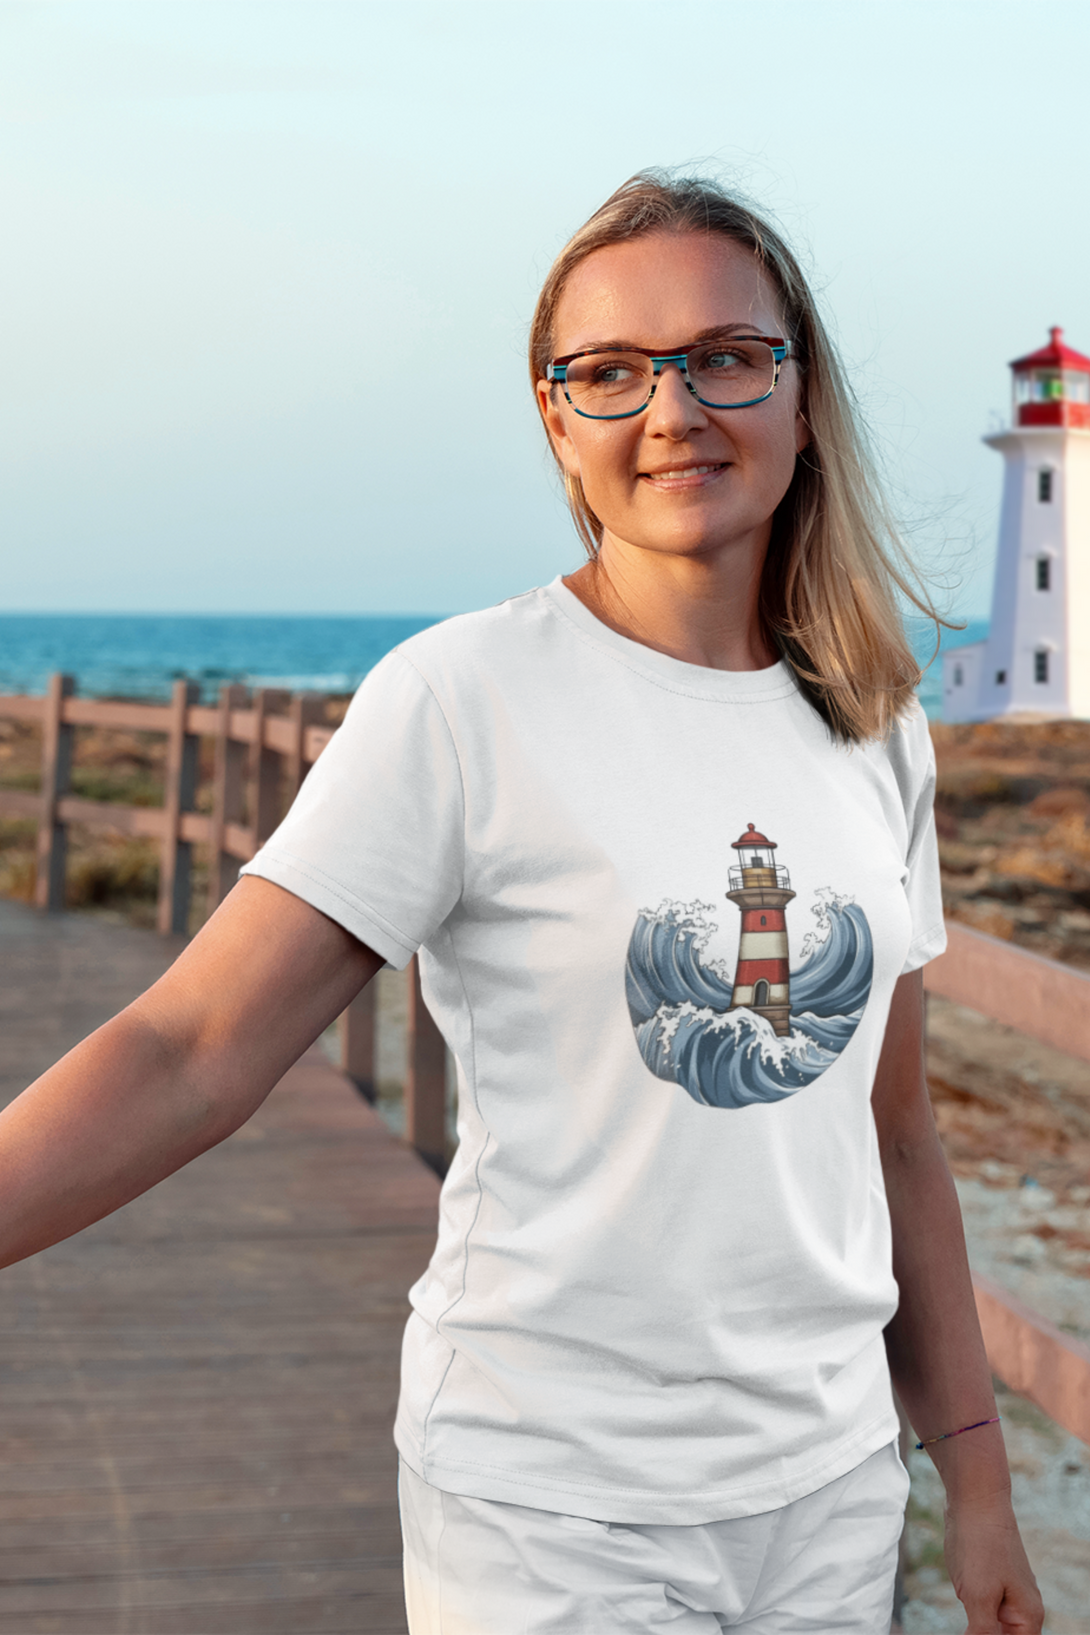 Lighthouse And Waves Printed T-Shirt For Women - WowWaves - 5